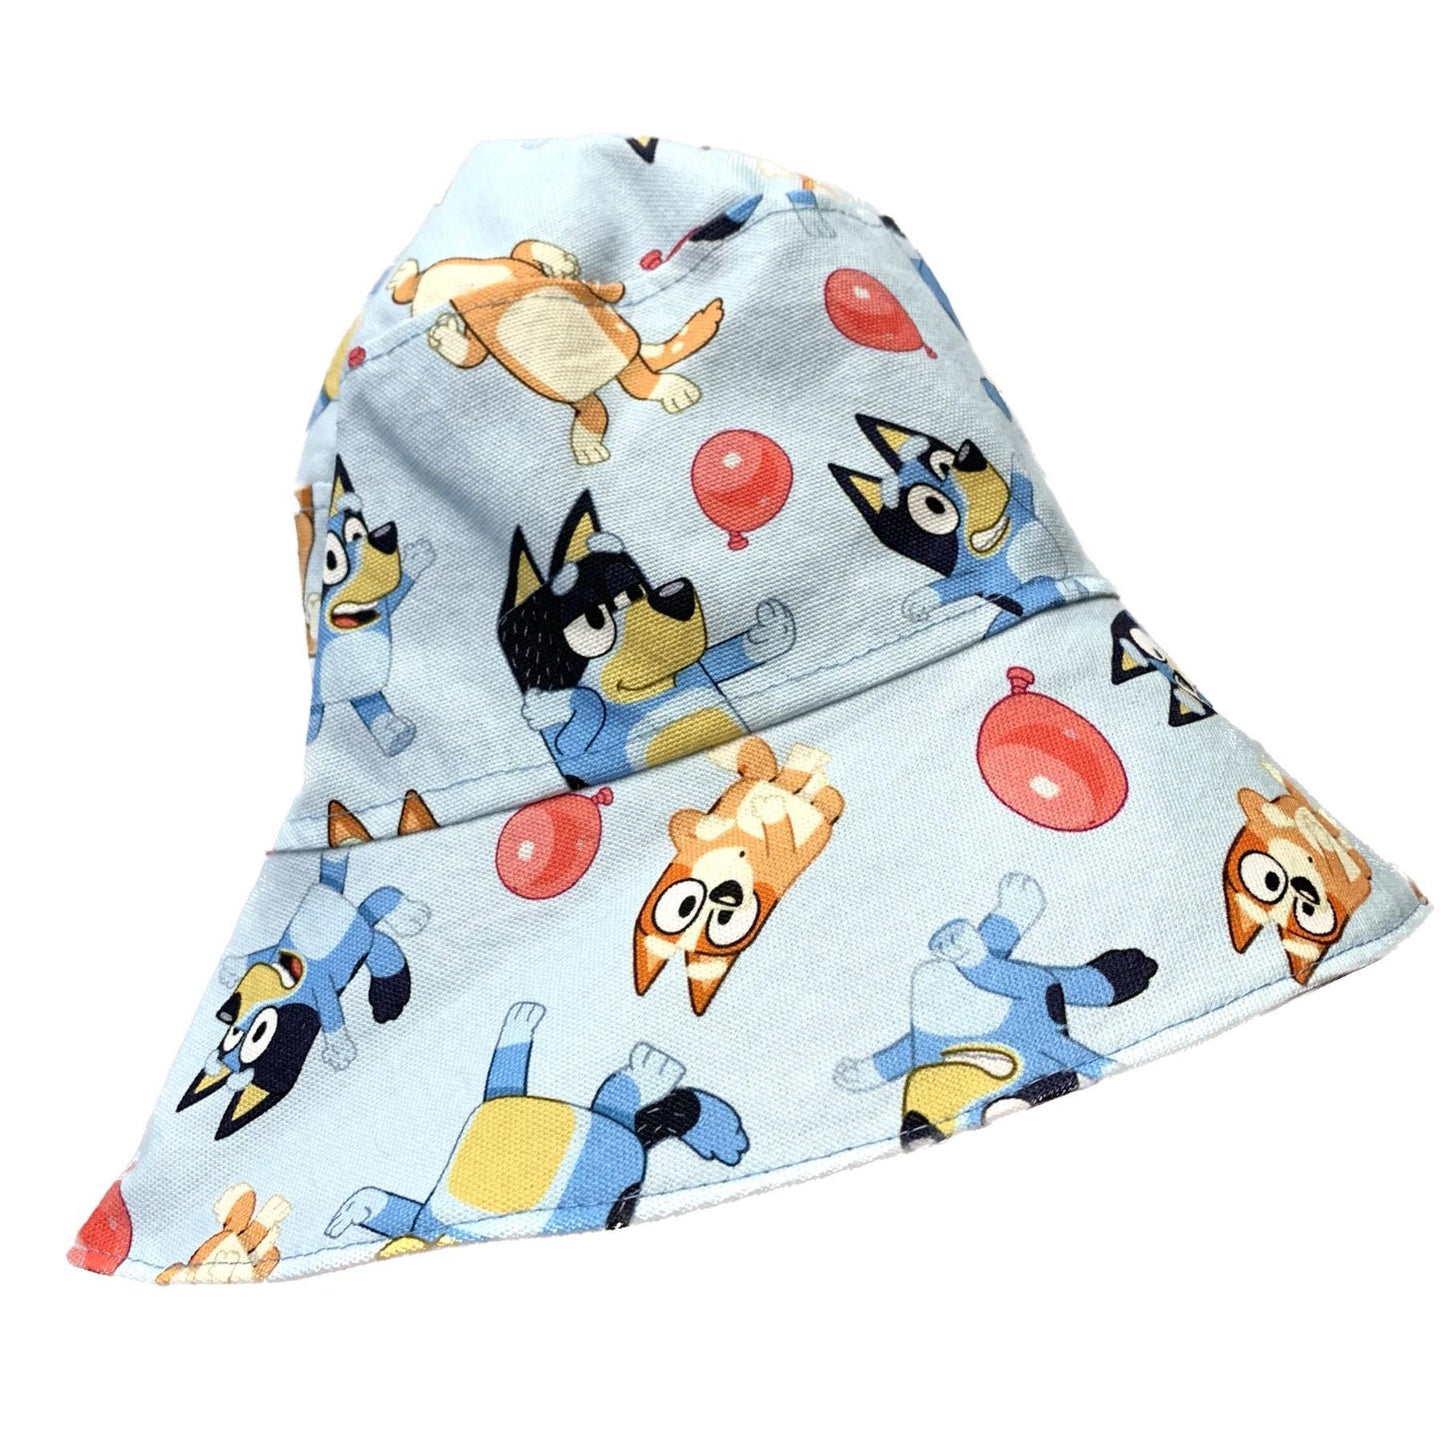 Teacups n Quilts- Bluey & Bingo Balloons Fabric Hat- Adult Size